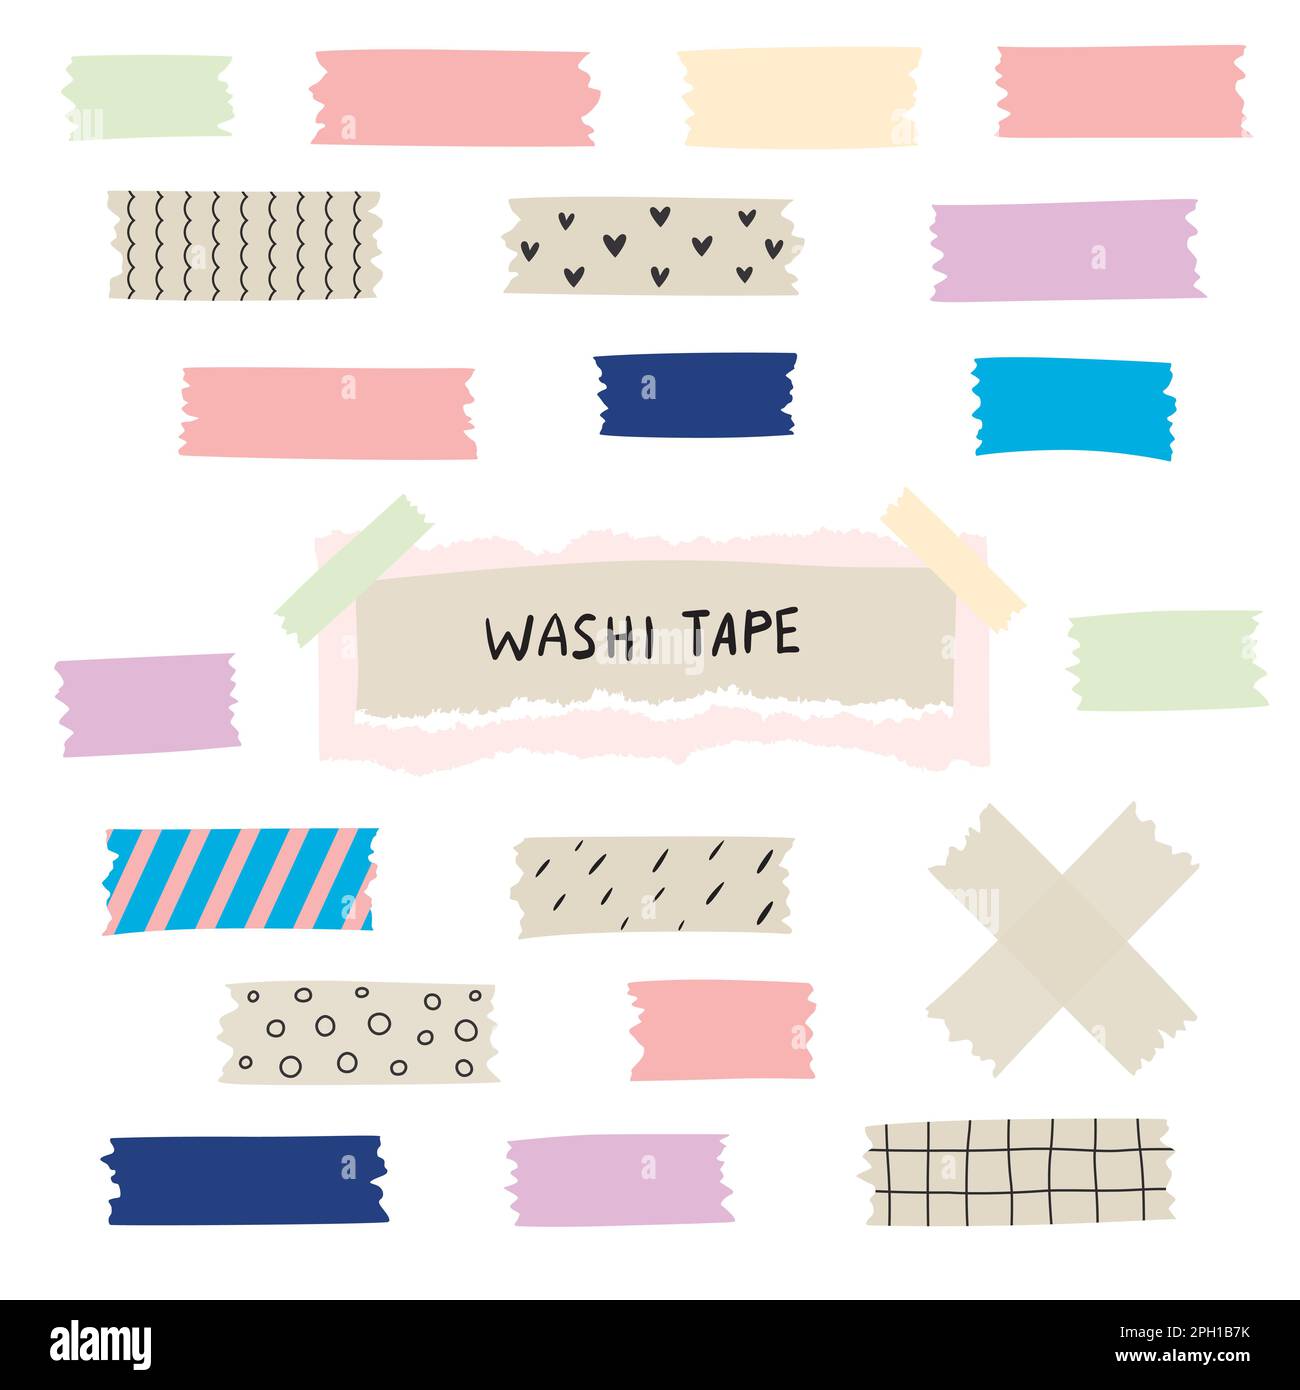 Washi Tape Strips Scrapbook Elements Stock Vector (Royalty Free